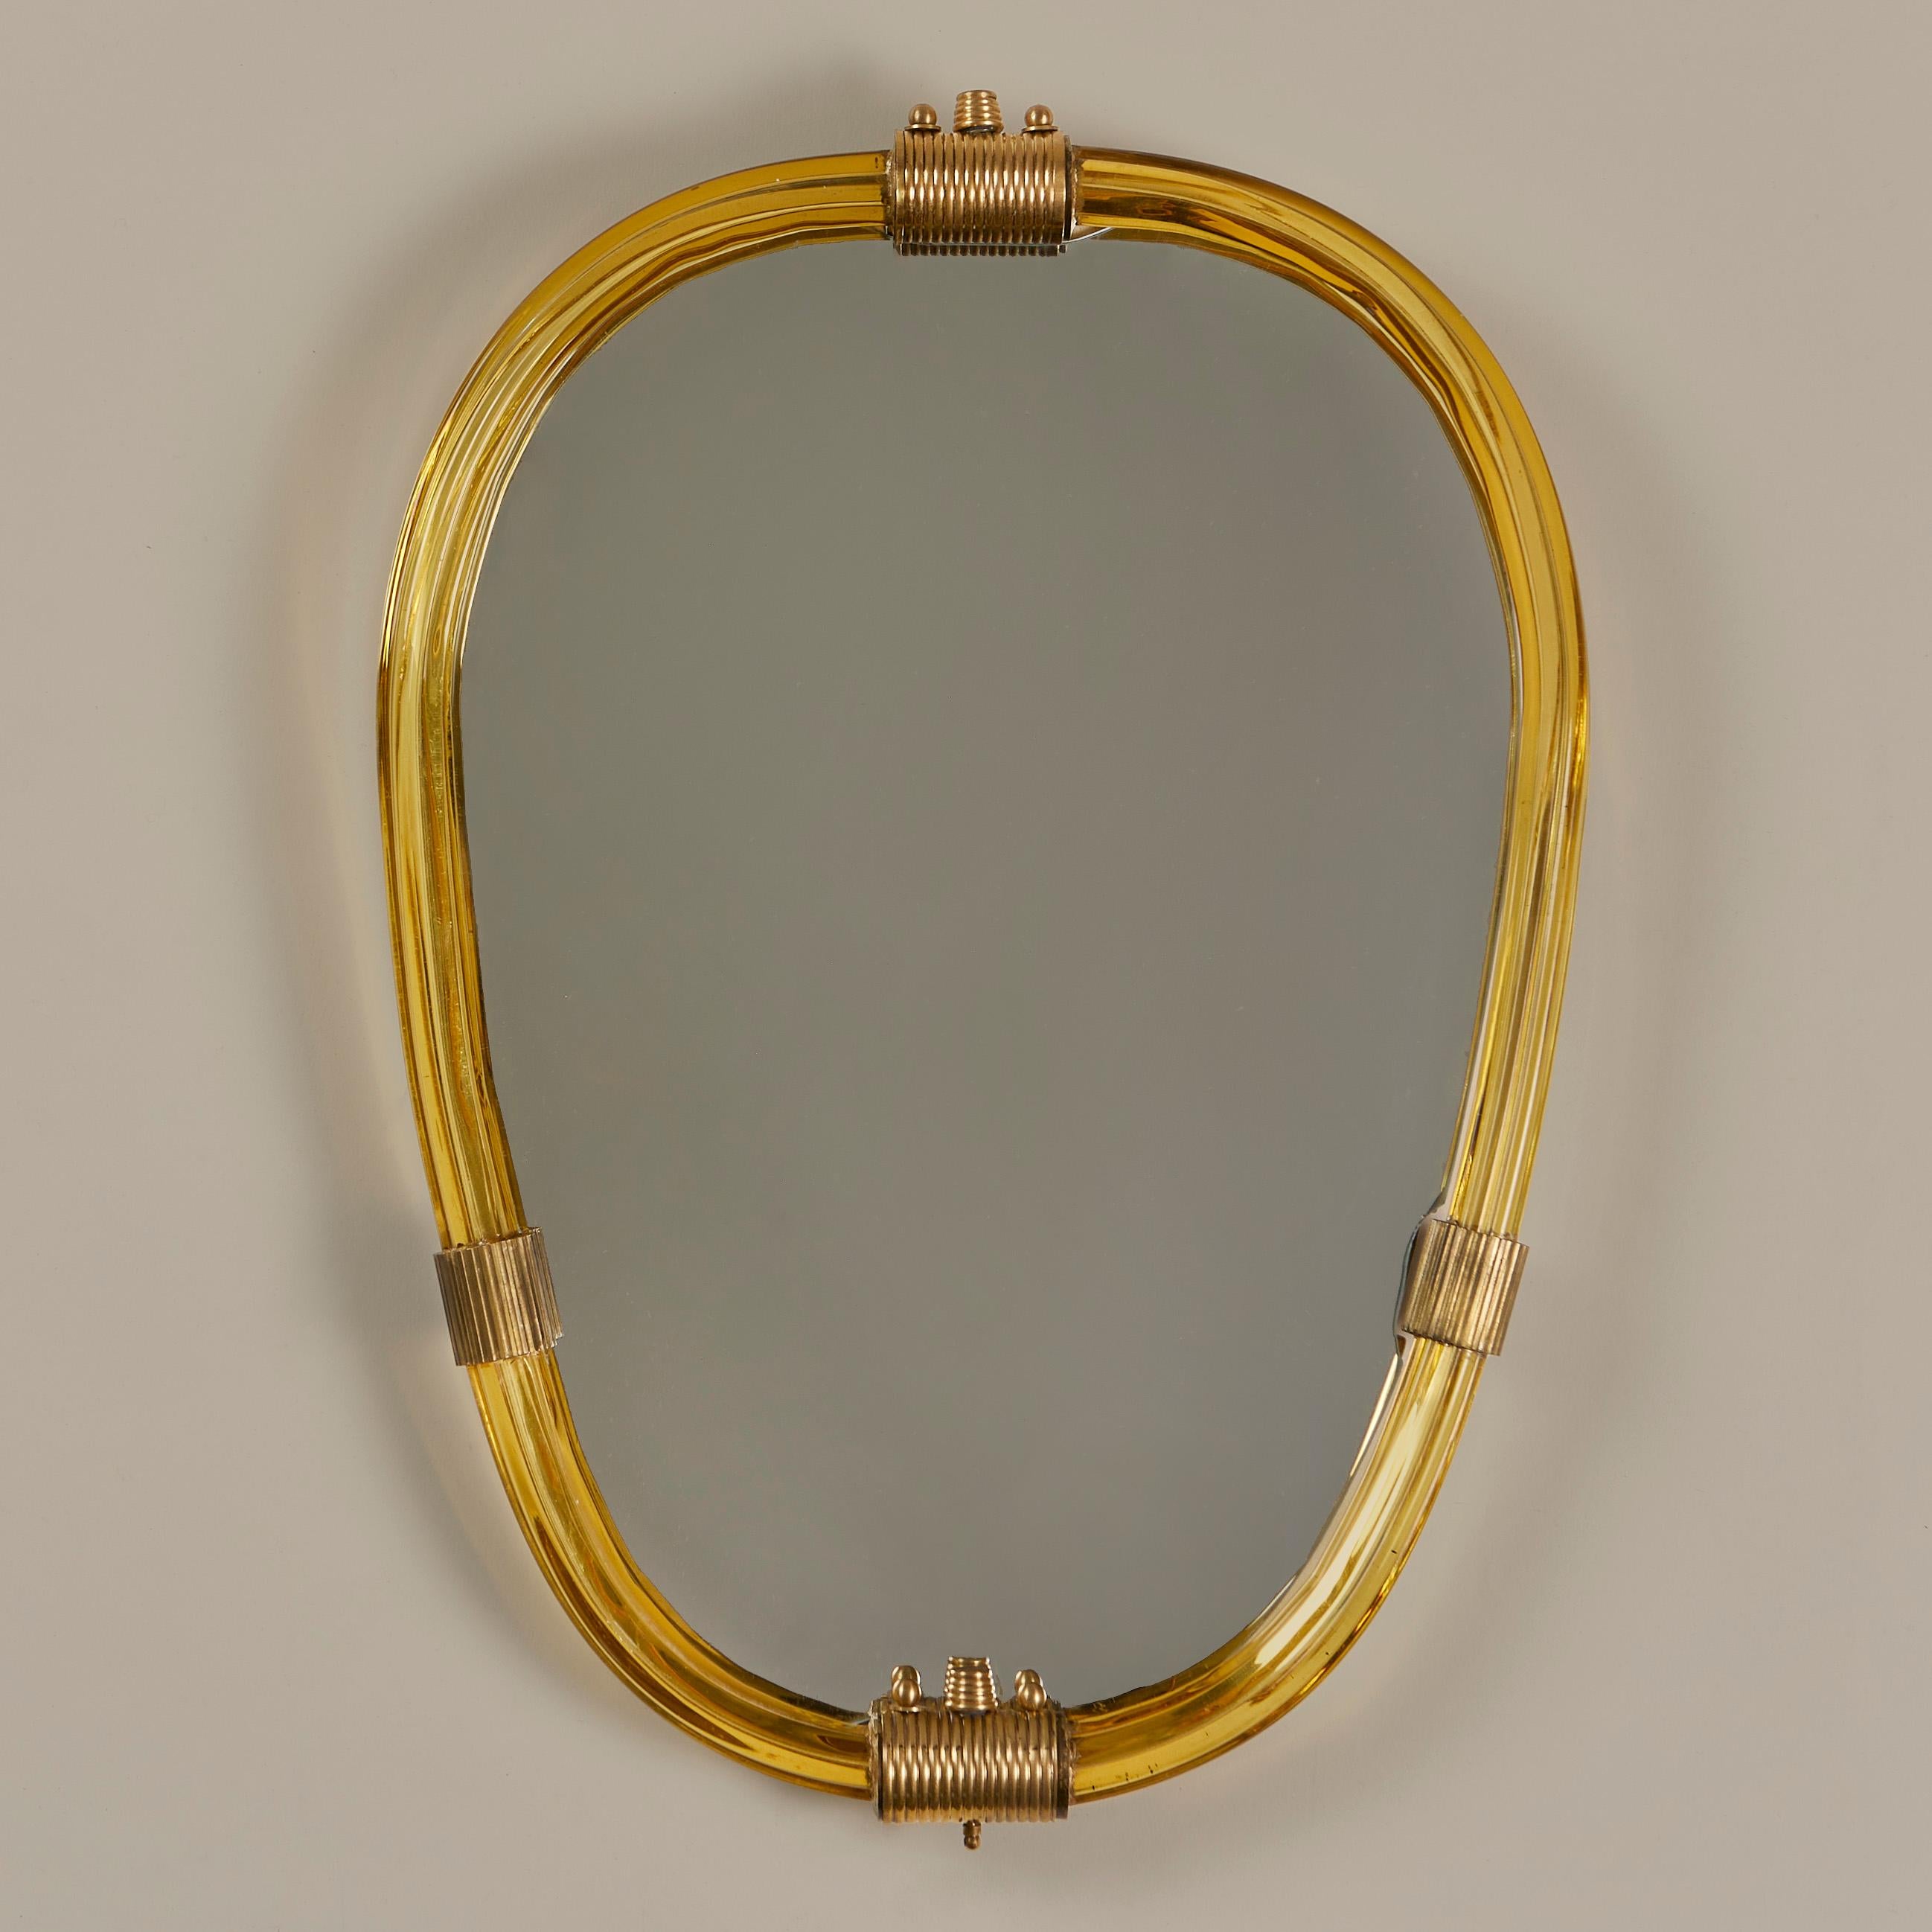 Vintage Murano rich gold artisan mirror with four decorative brass clasps.